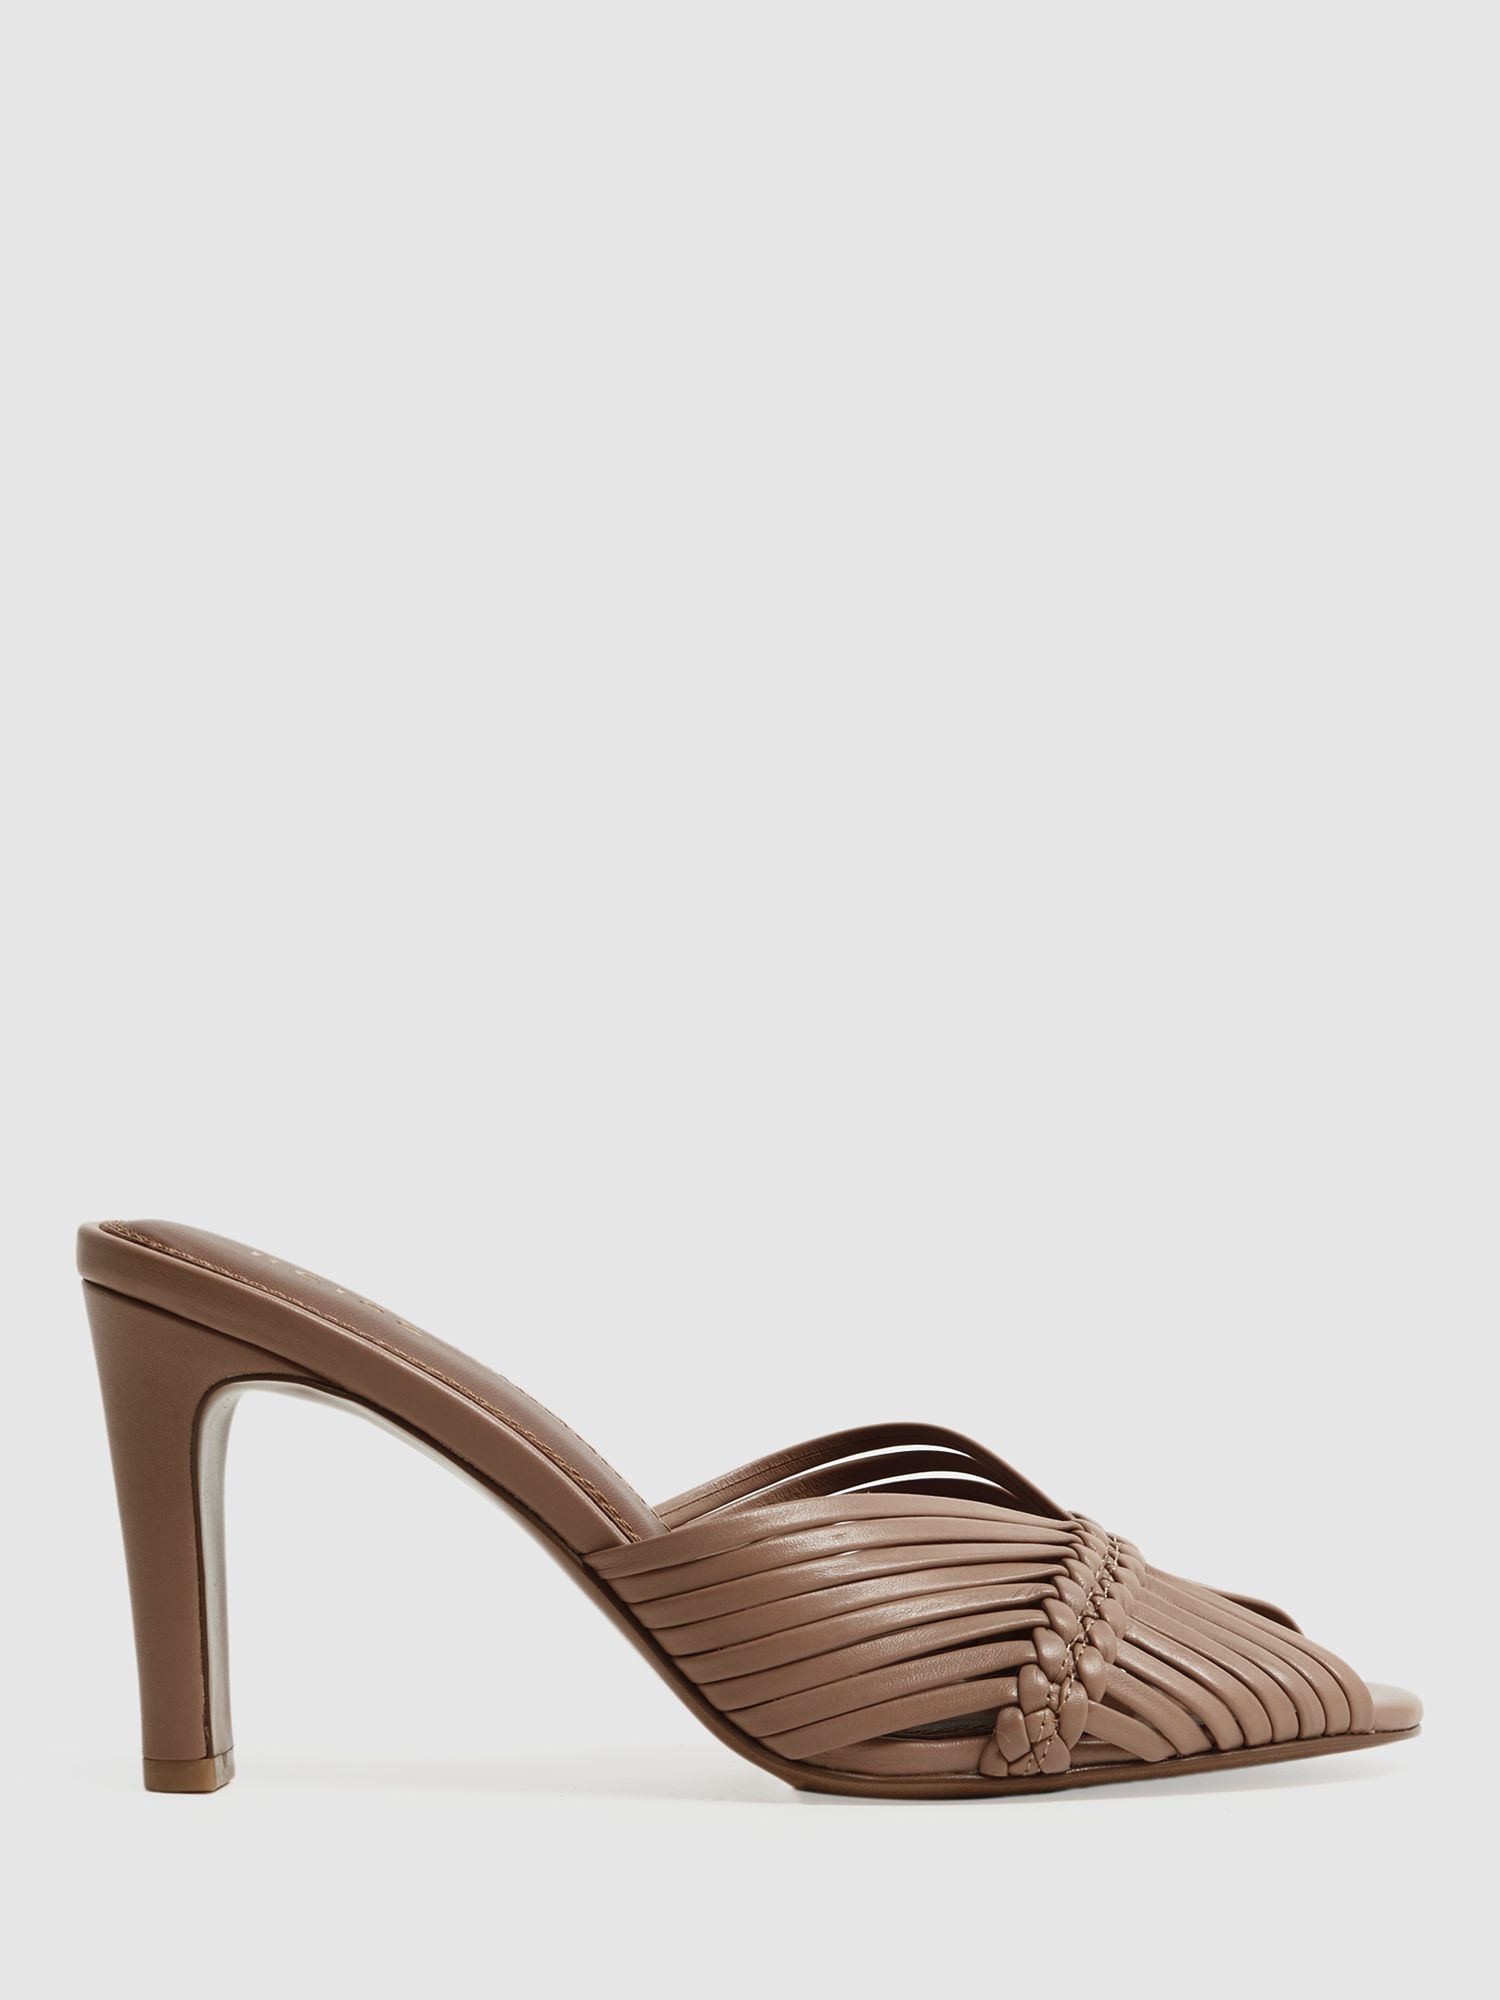 Reiss Imogen Woven Leather Heeled Mules, Blush at John Lewis & Partners